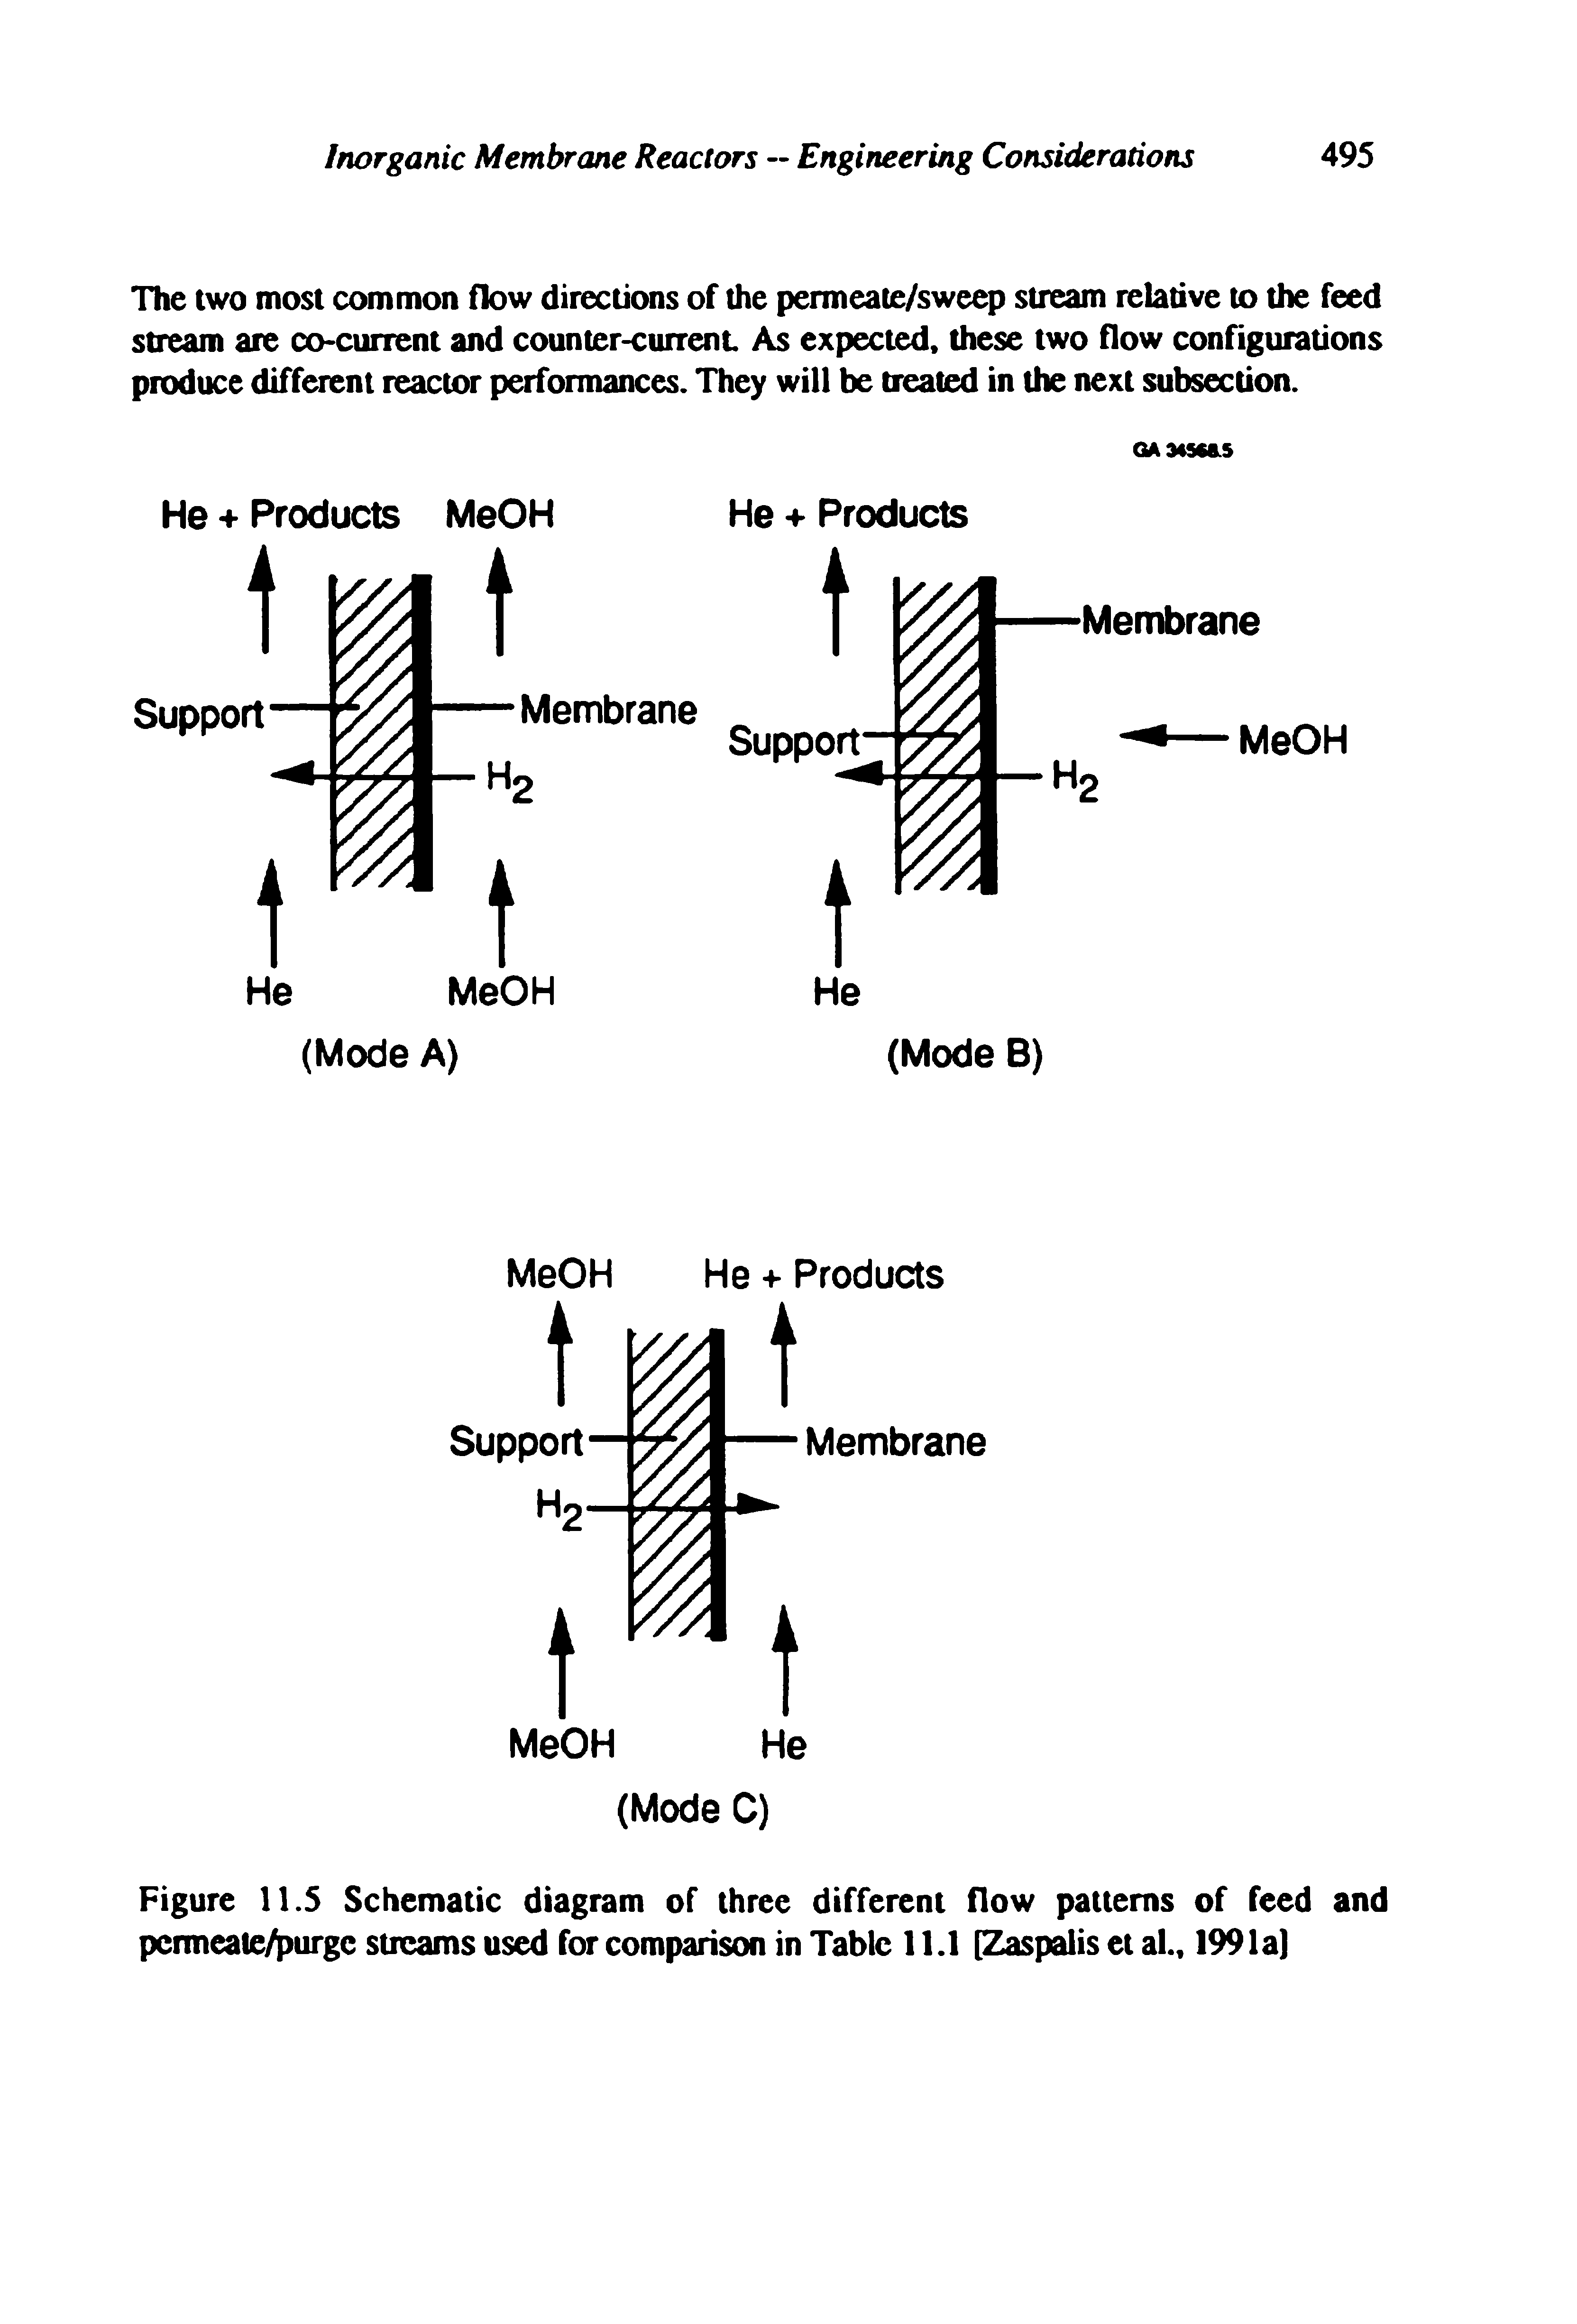 Figure 11.5 Schematic diagram of three different flow patterns of feed and permeate/purge streams used for comparison in Table 11.1 [Zaspalis et al.. 1991a)...